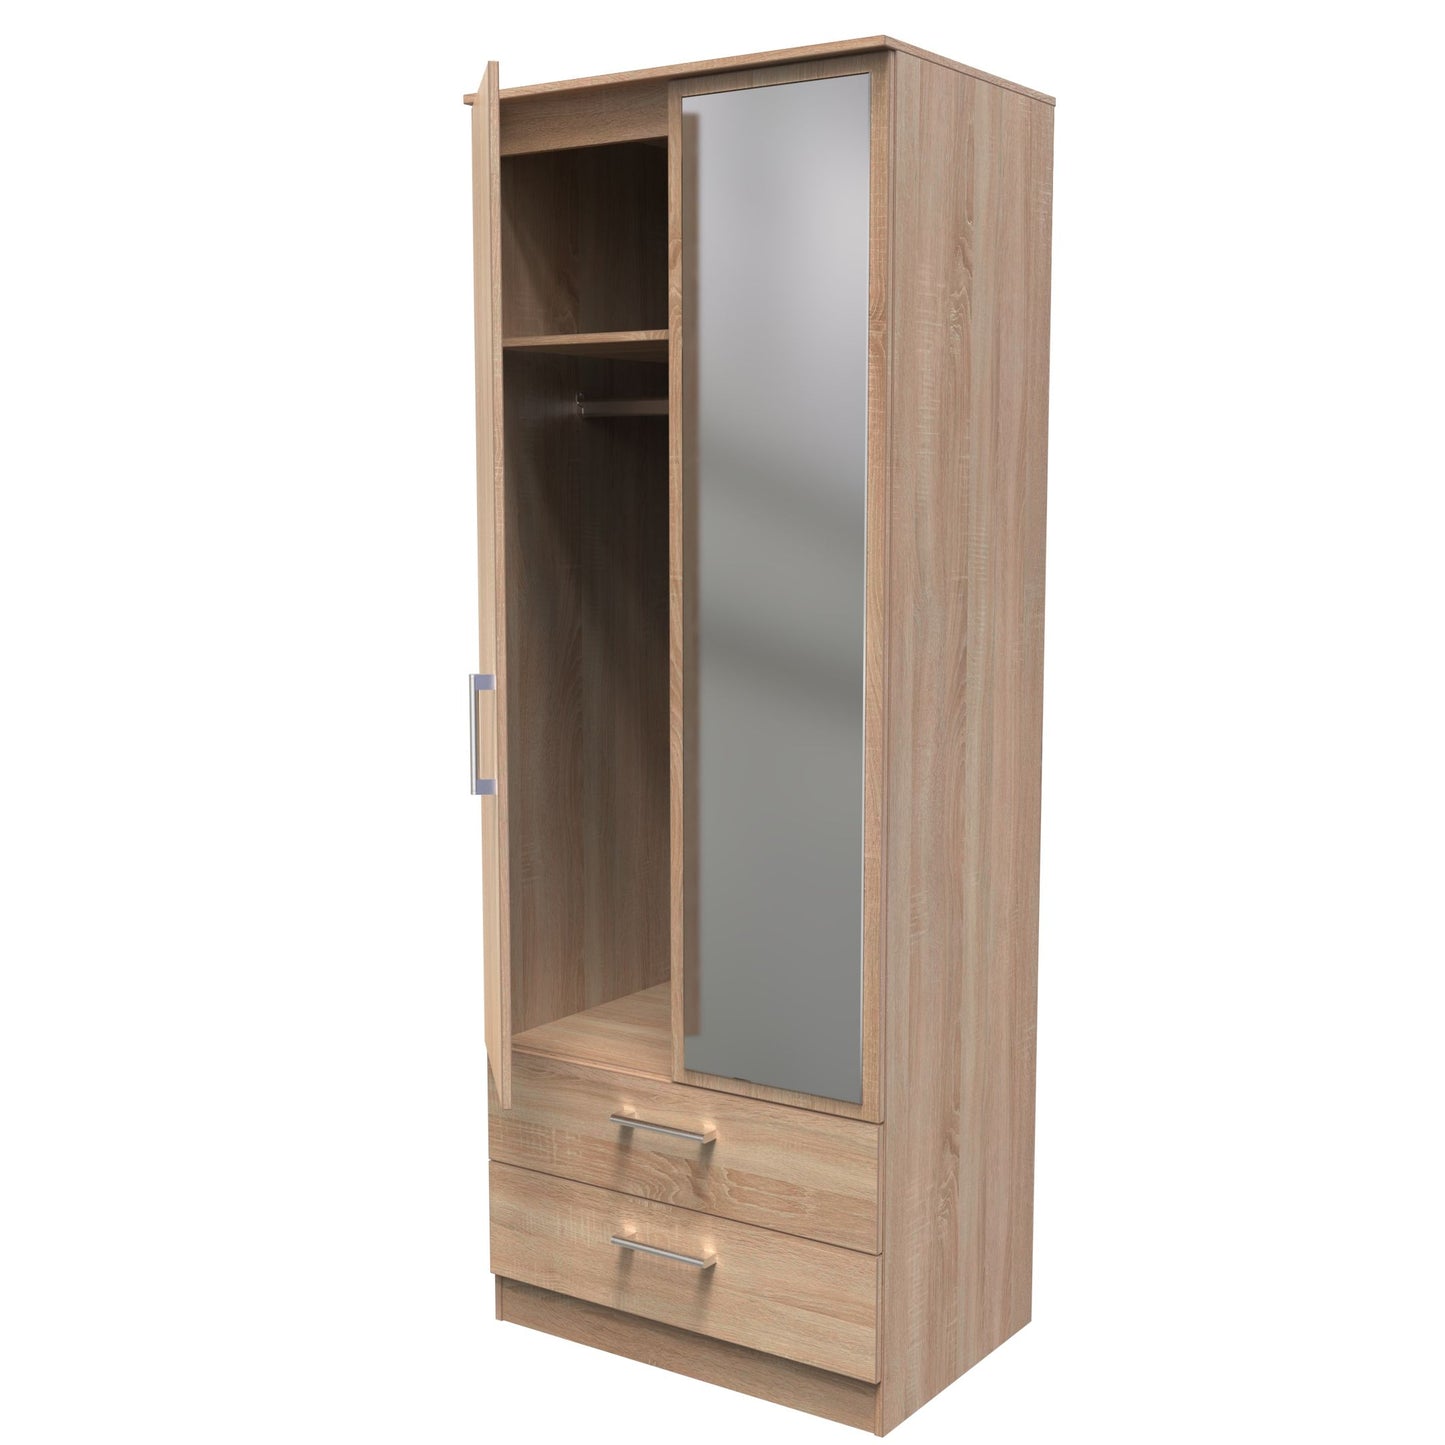 2 door wardrobe with drawers and mirror ready assembled